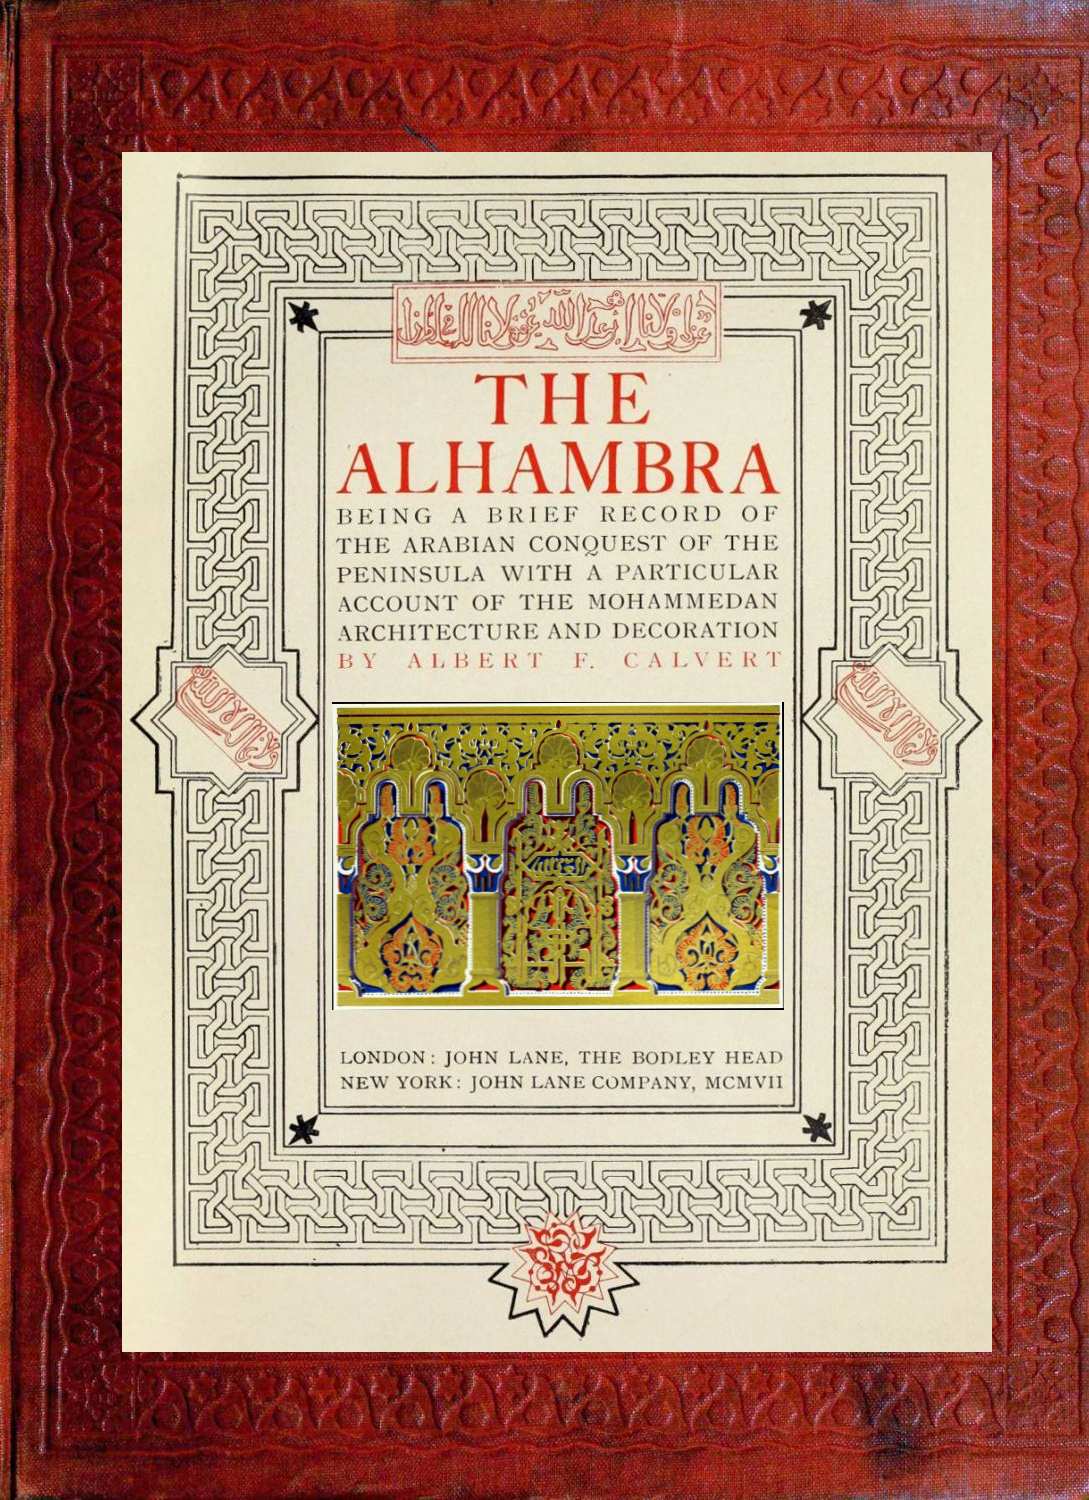 The Alhambra&#10;being a brief record of the Arabian conquest of the Peninsula with a particular account of the Mohammedan architecture and decoration